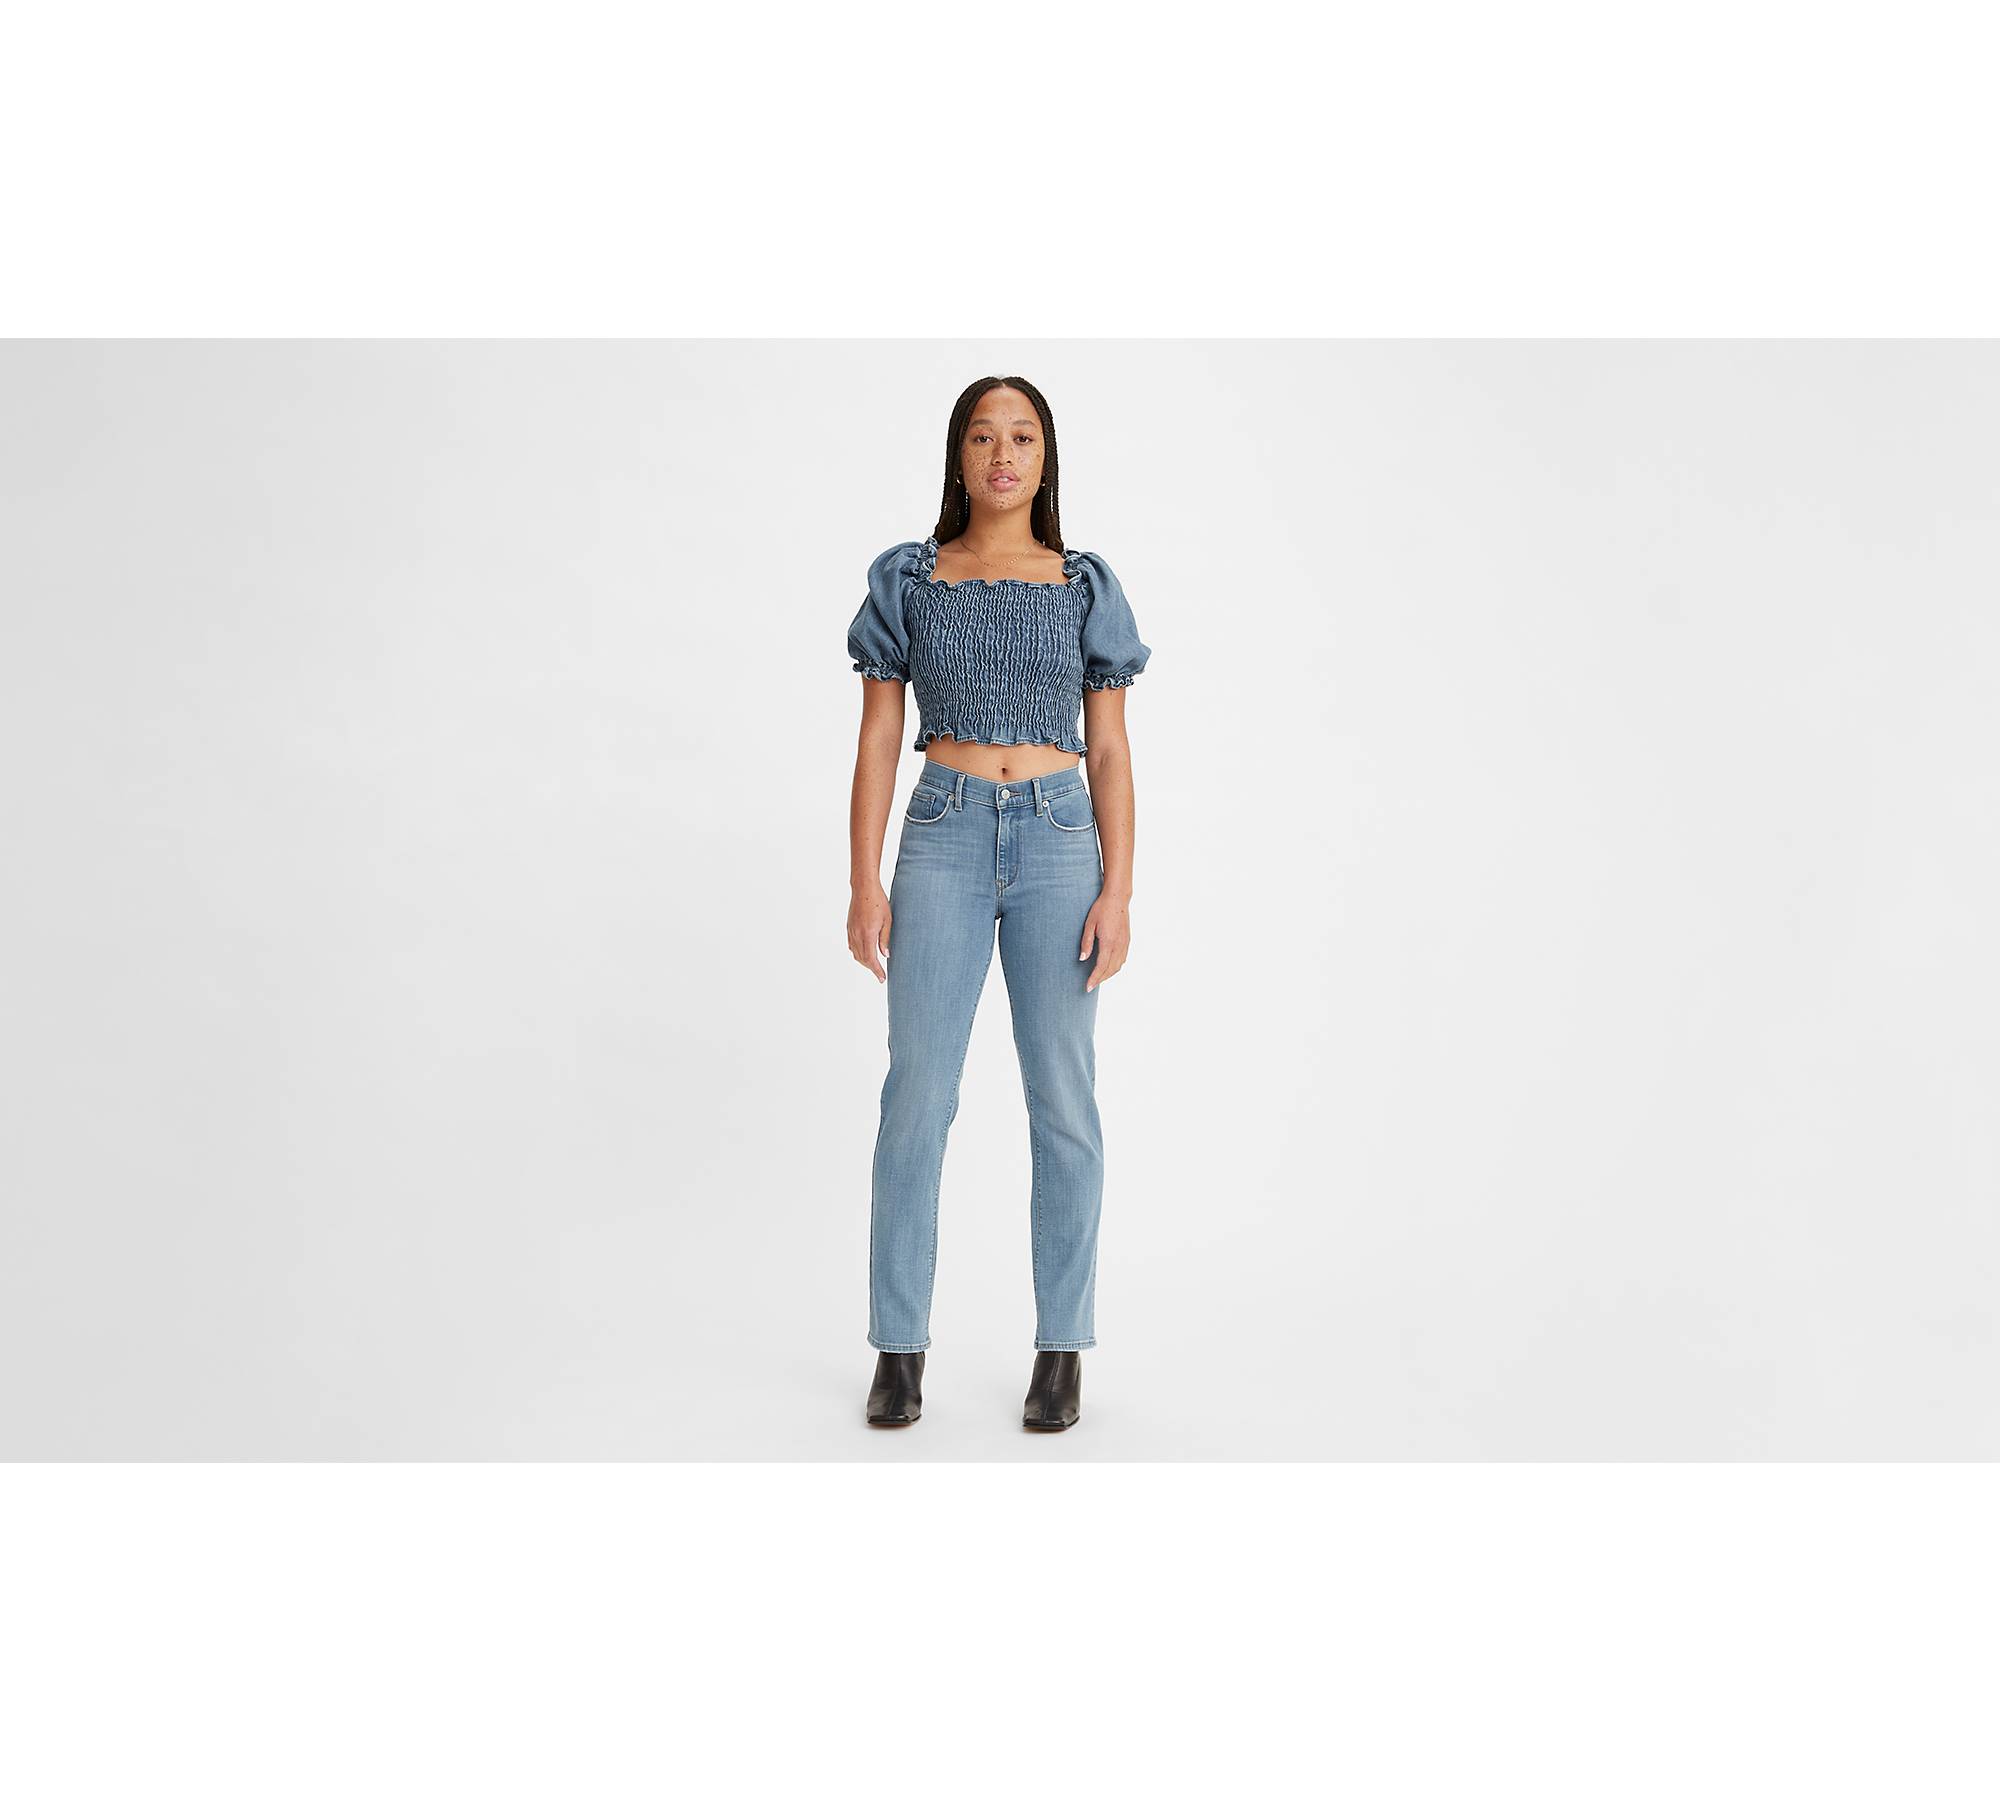 Levi's Women's Classic Straight Fit Jeans